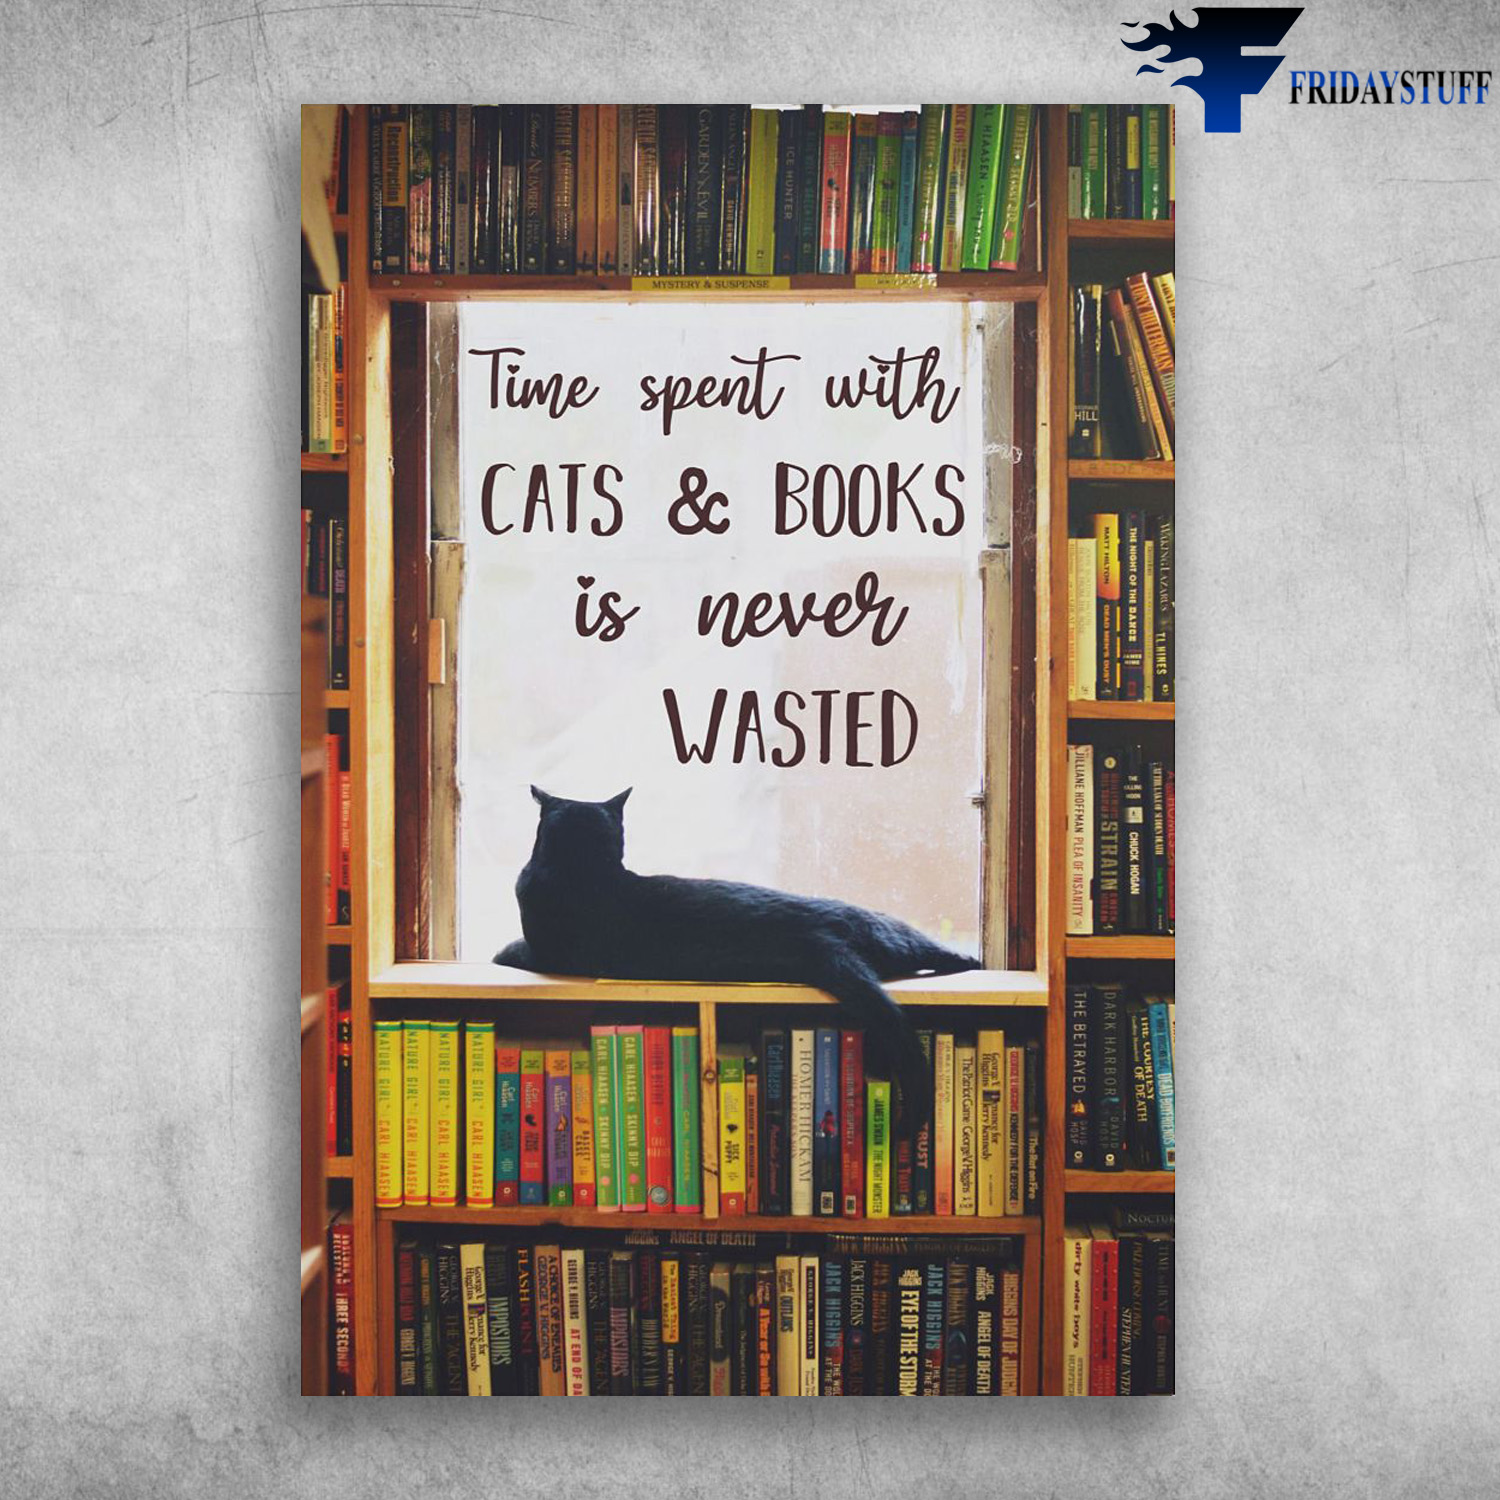 Black Cat Lie On Bookshelf - Time Spent With Cats And Books, Is Never Wasted